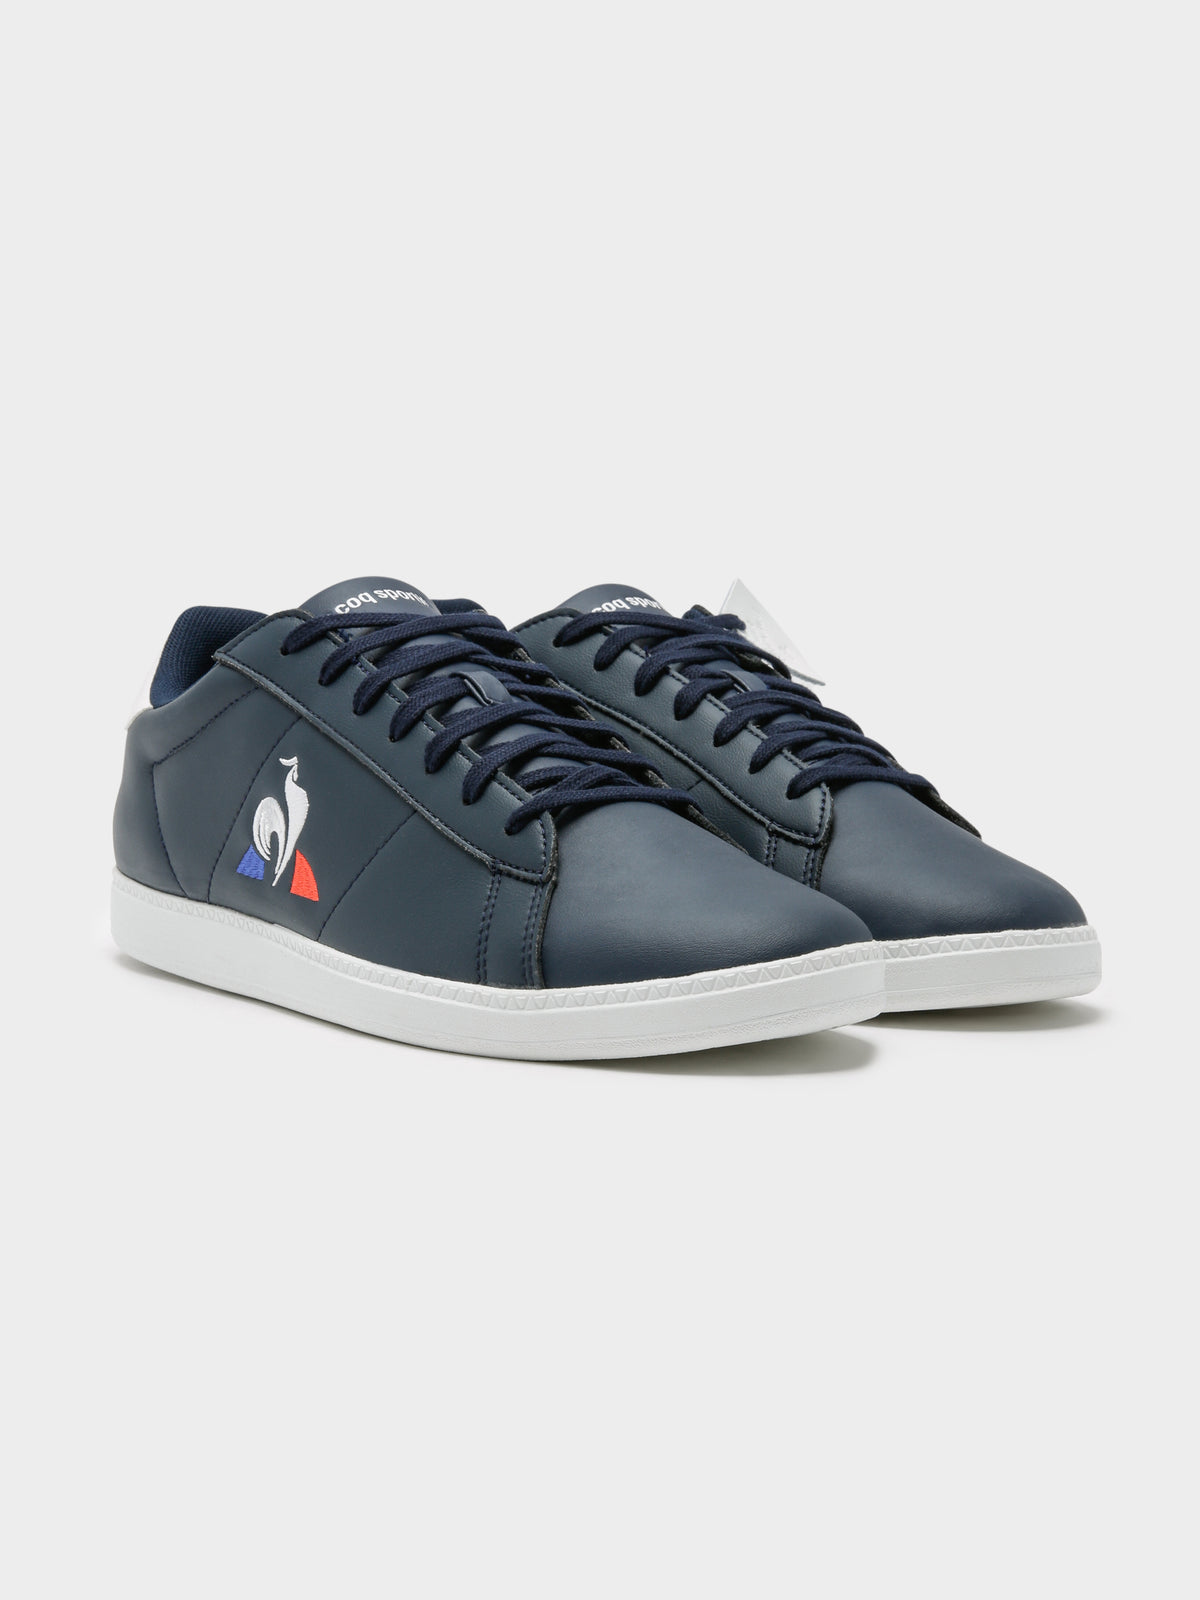 Mens Courtset Leather Sneakers in Navy